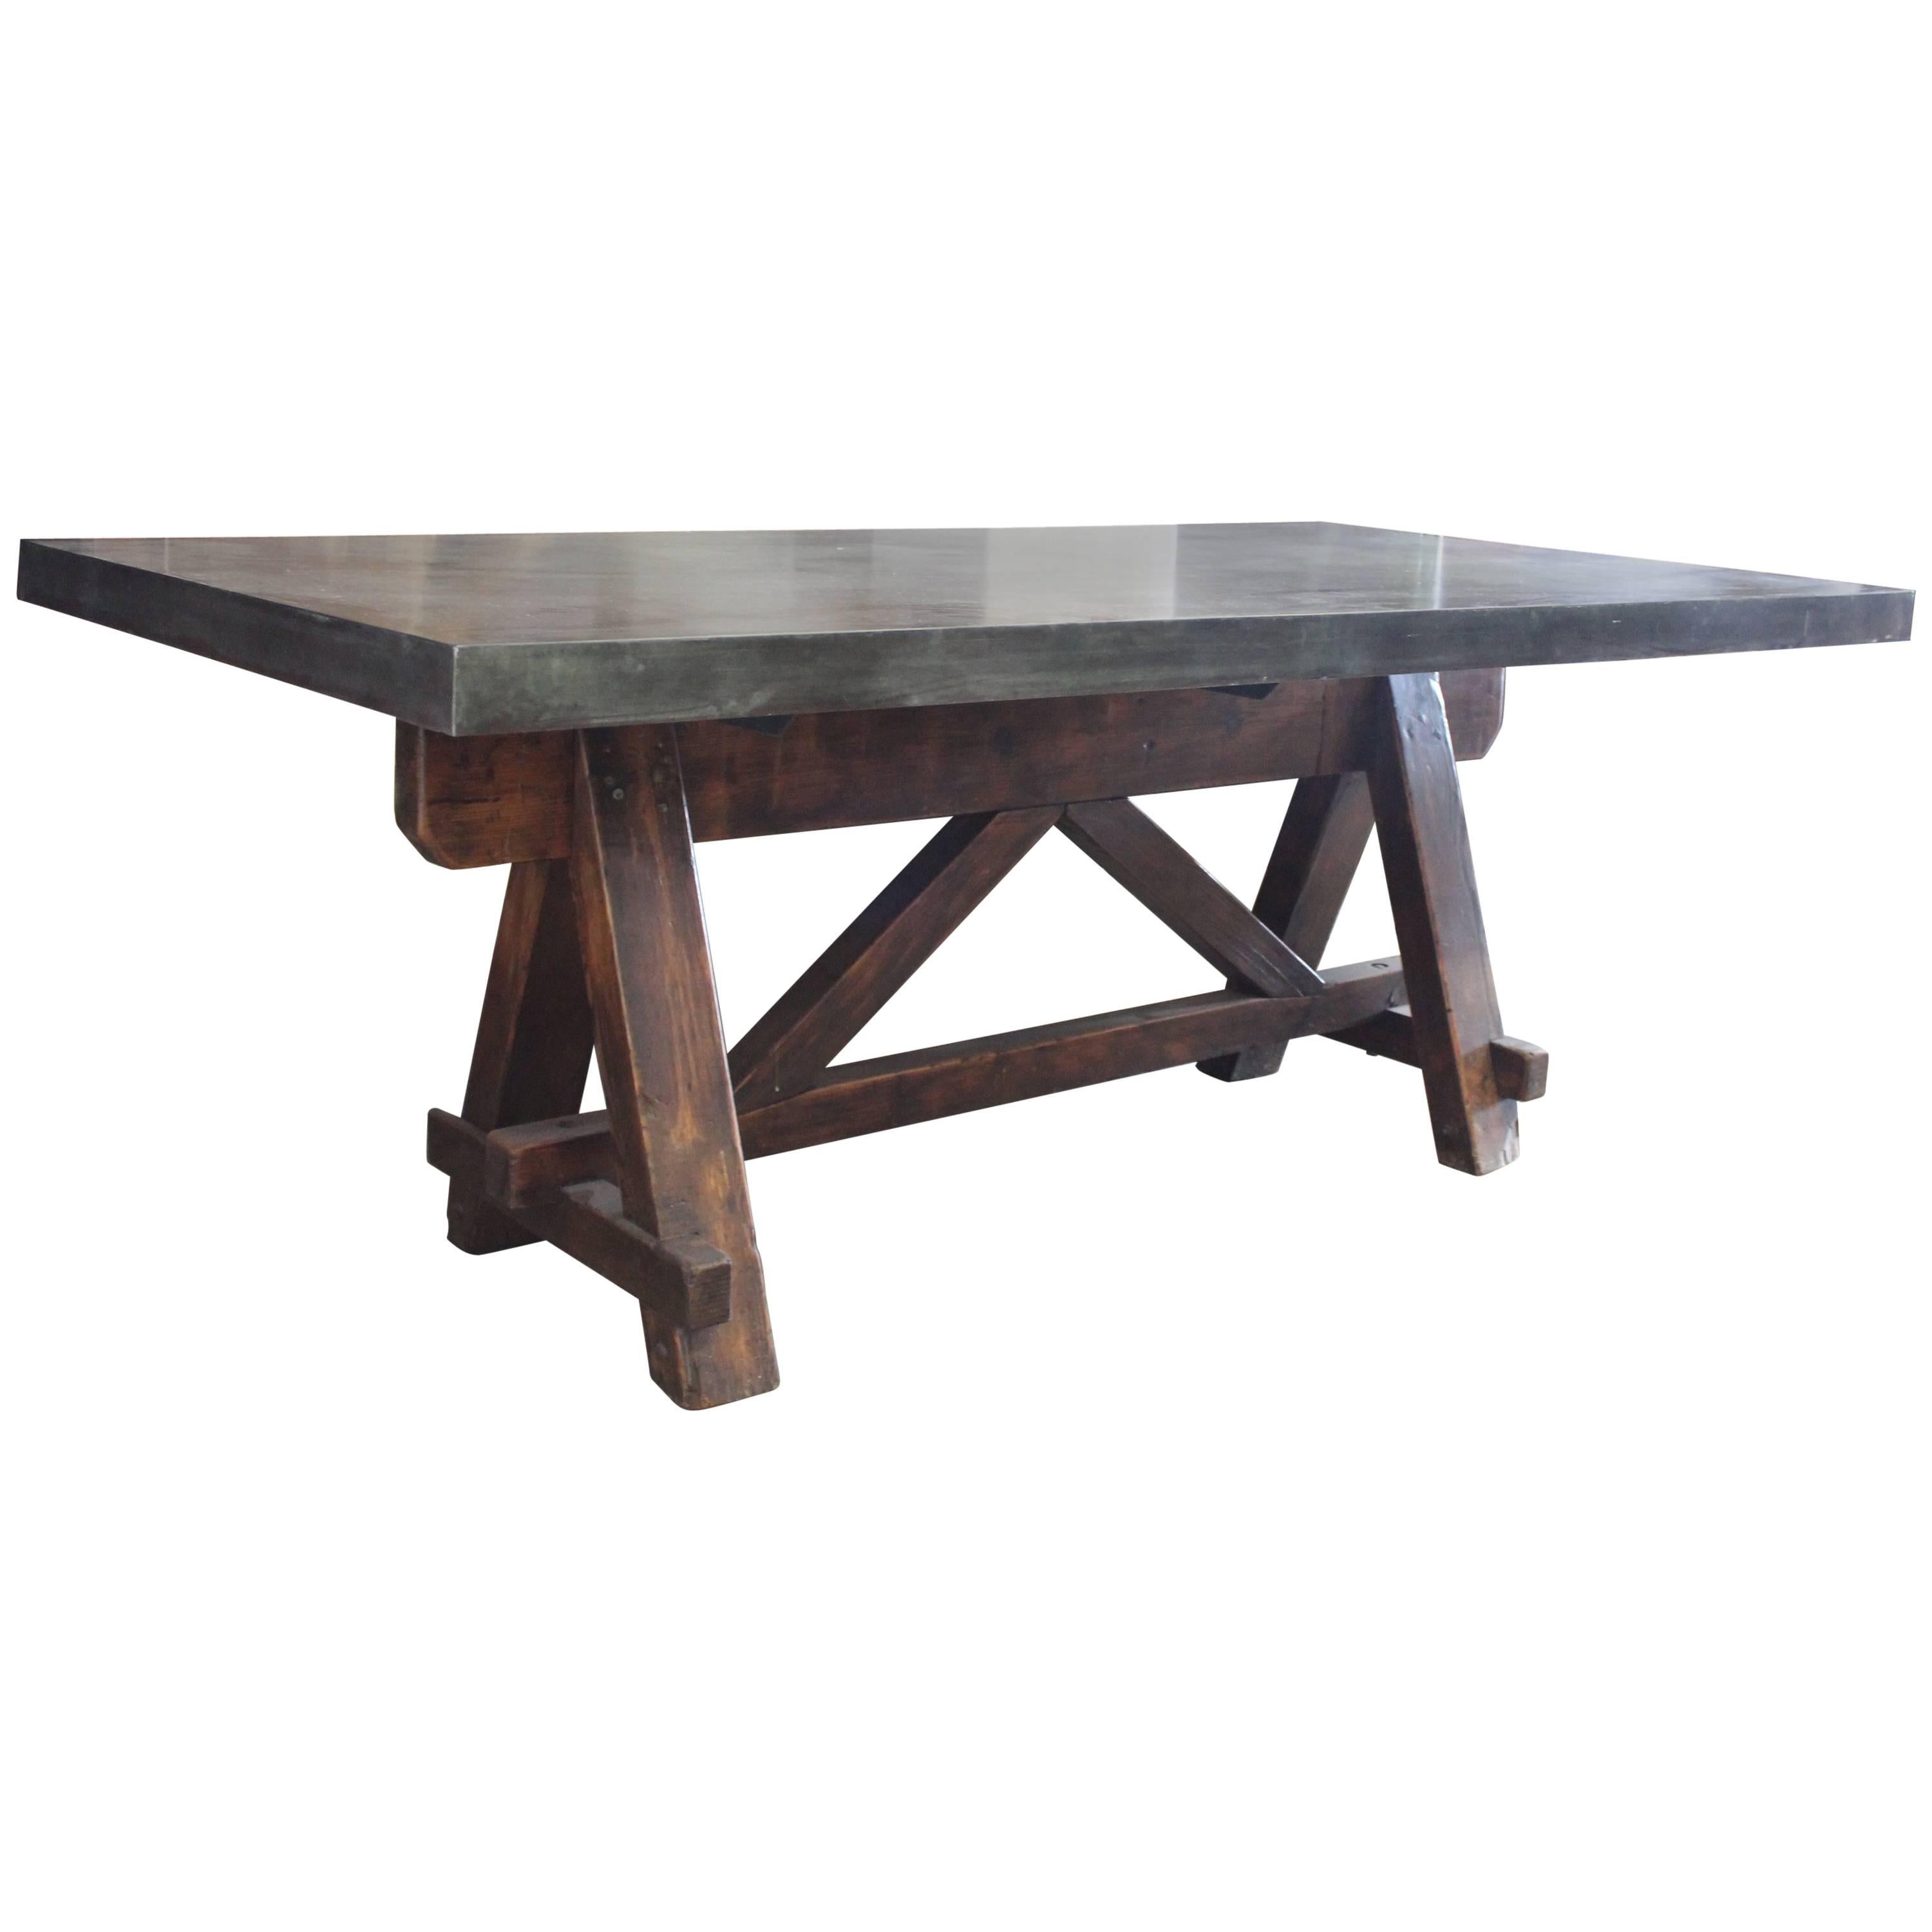 Vintage French Tradesman's Sawhorse as dining table with patinated zinc top.